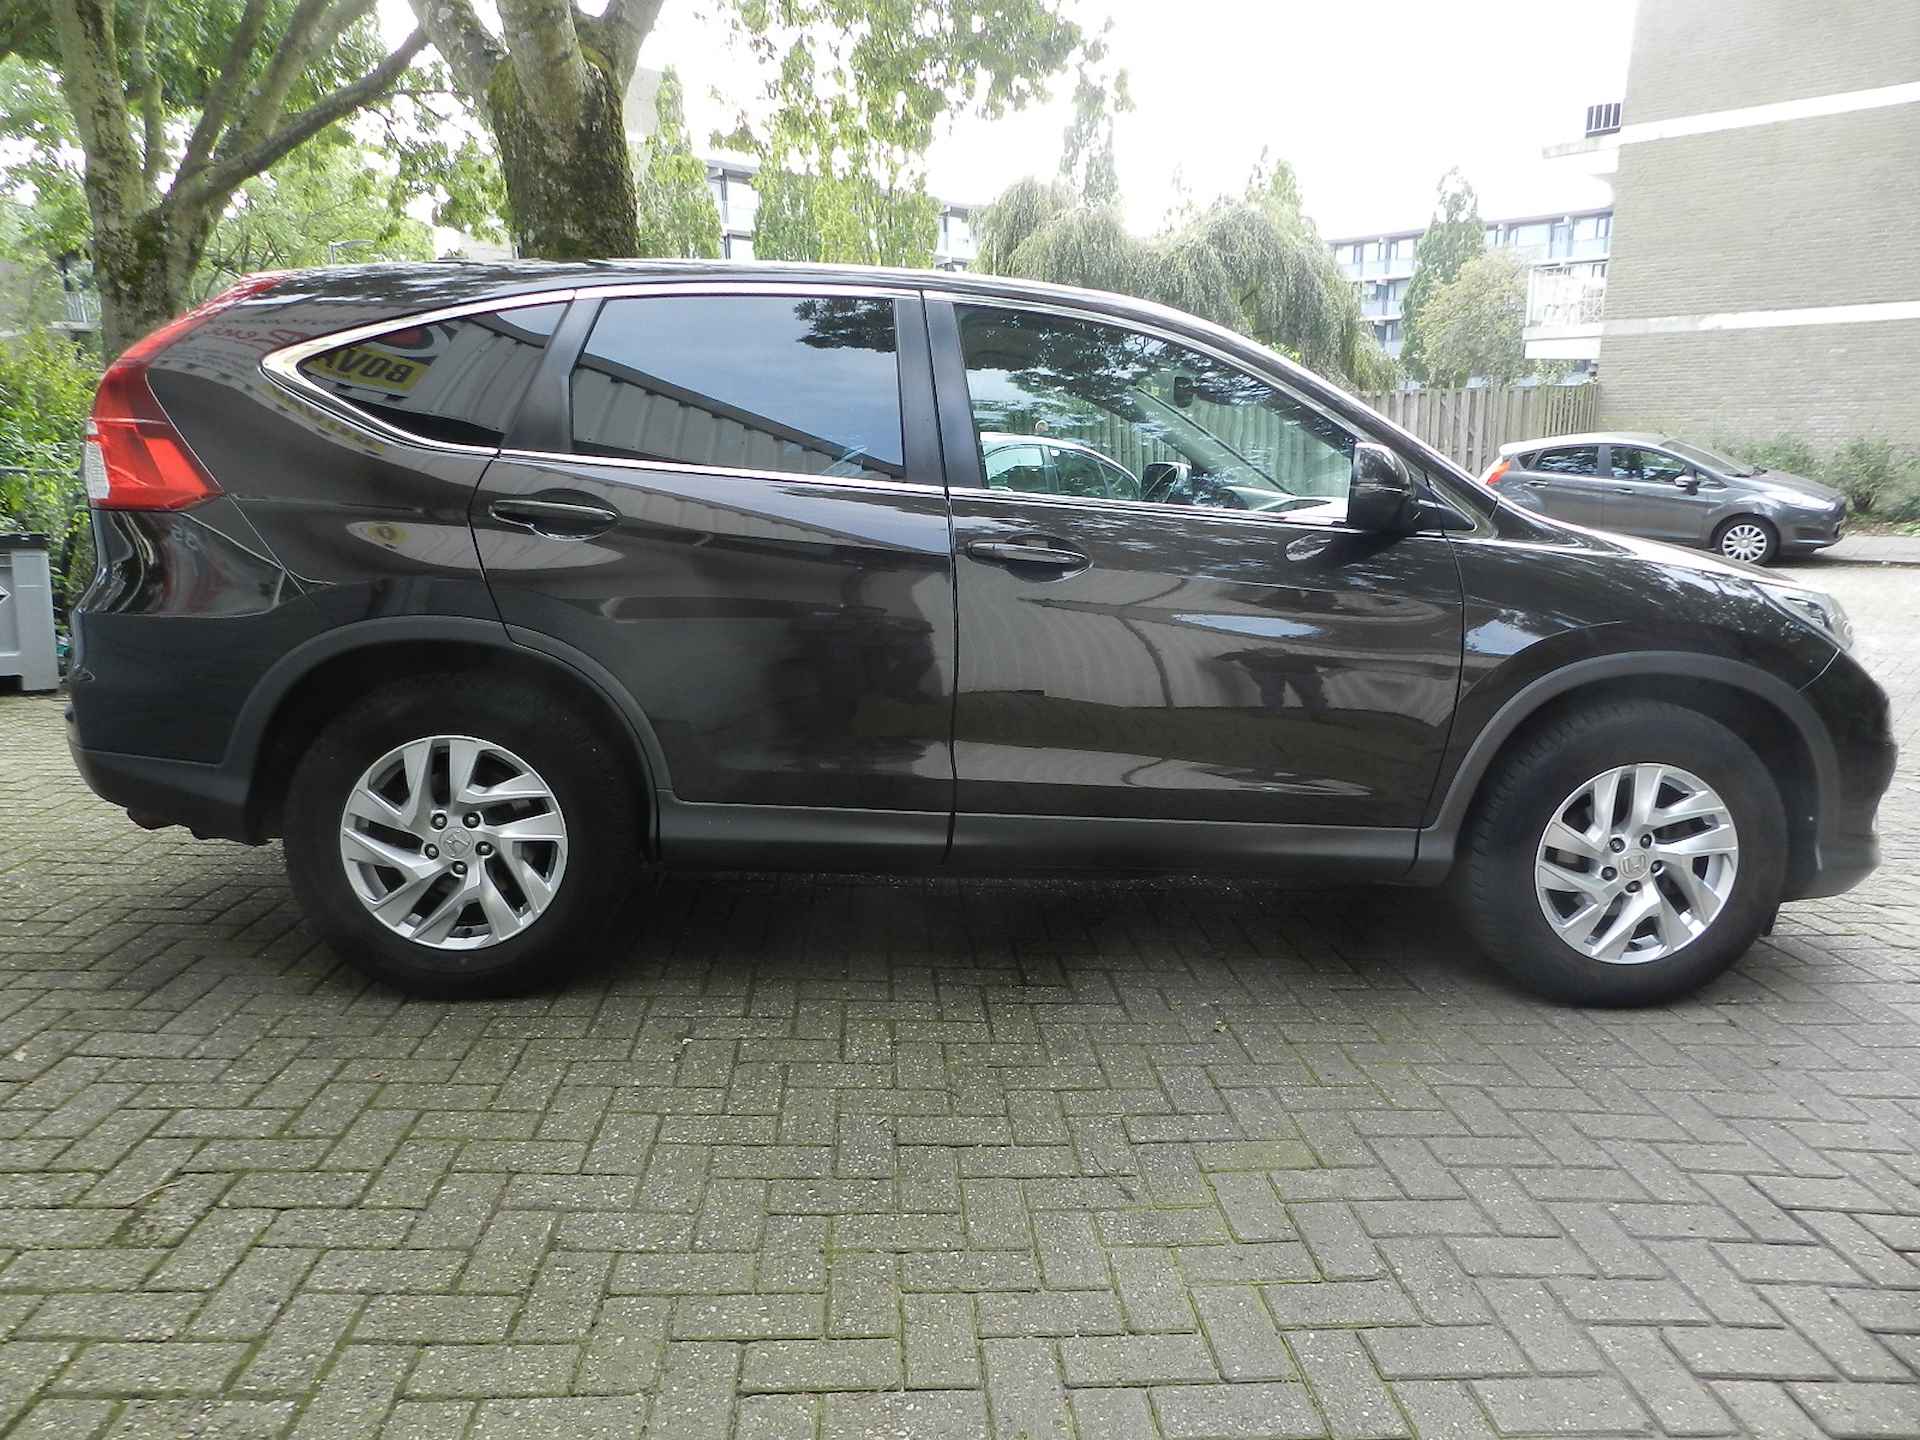 Honda CR-V 2.0 4WD Lifestyle Automaat Climate en Cruise contr PDC Camera - 11/50